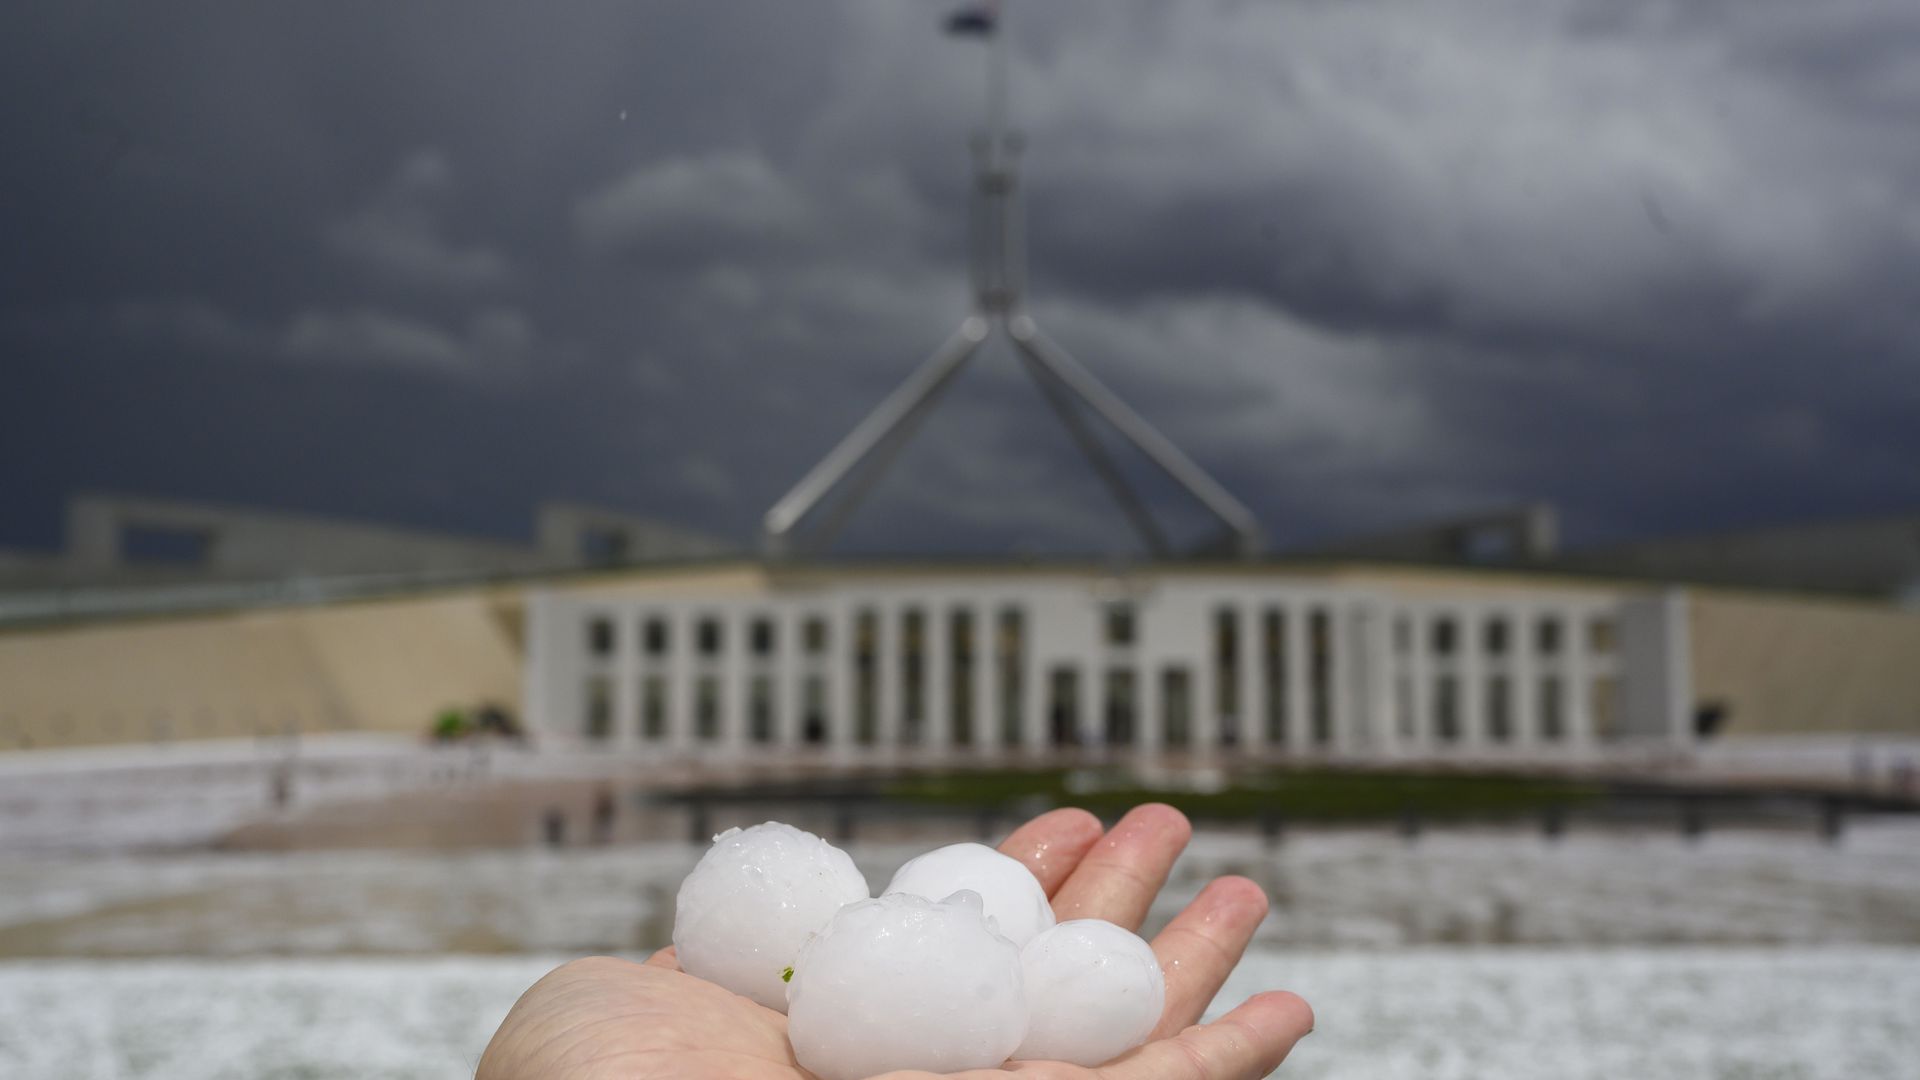 Hail the size of golf balls outside Parliament House in Canberra, Australian Capital Territory, on Monday.